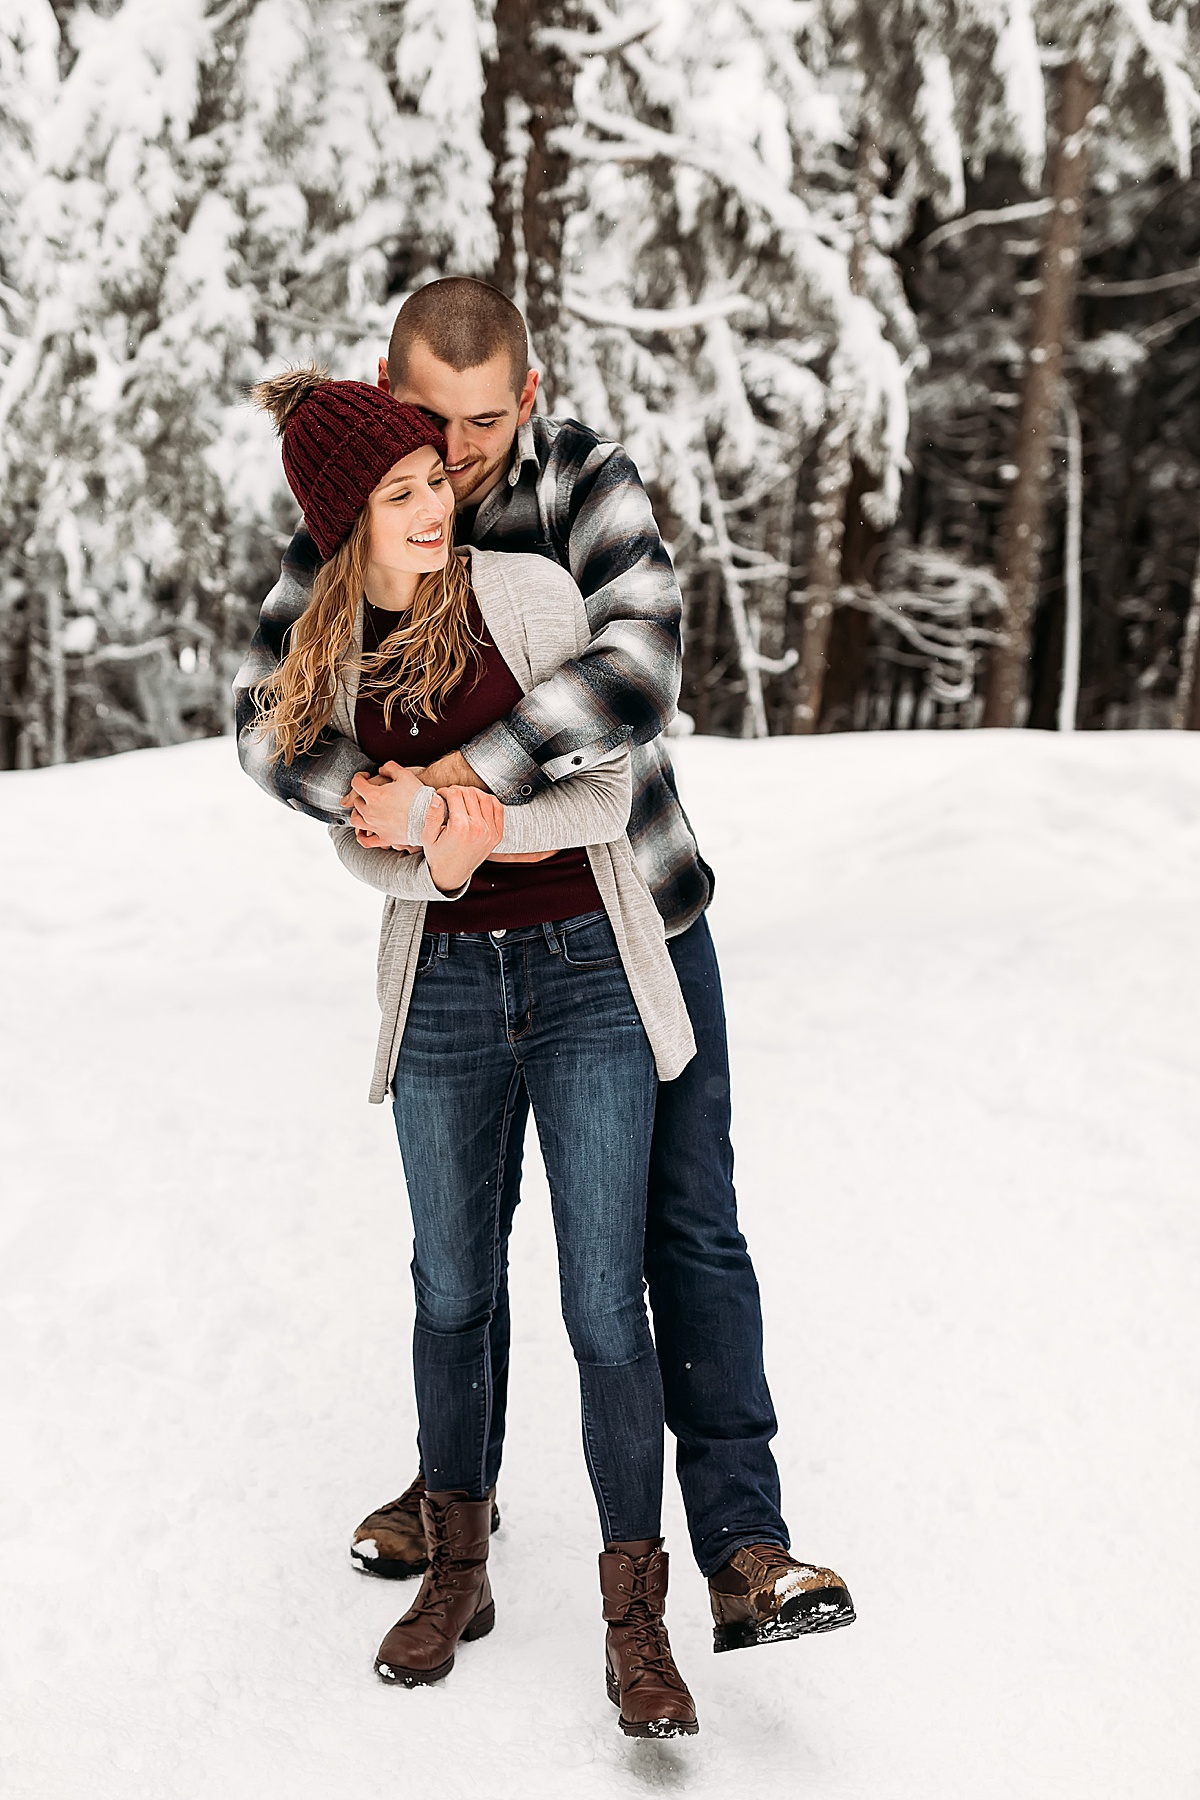 Playful Couple and Puppy Snow Photoshoot -   17 christmas photoshoot couples outfits ideas